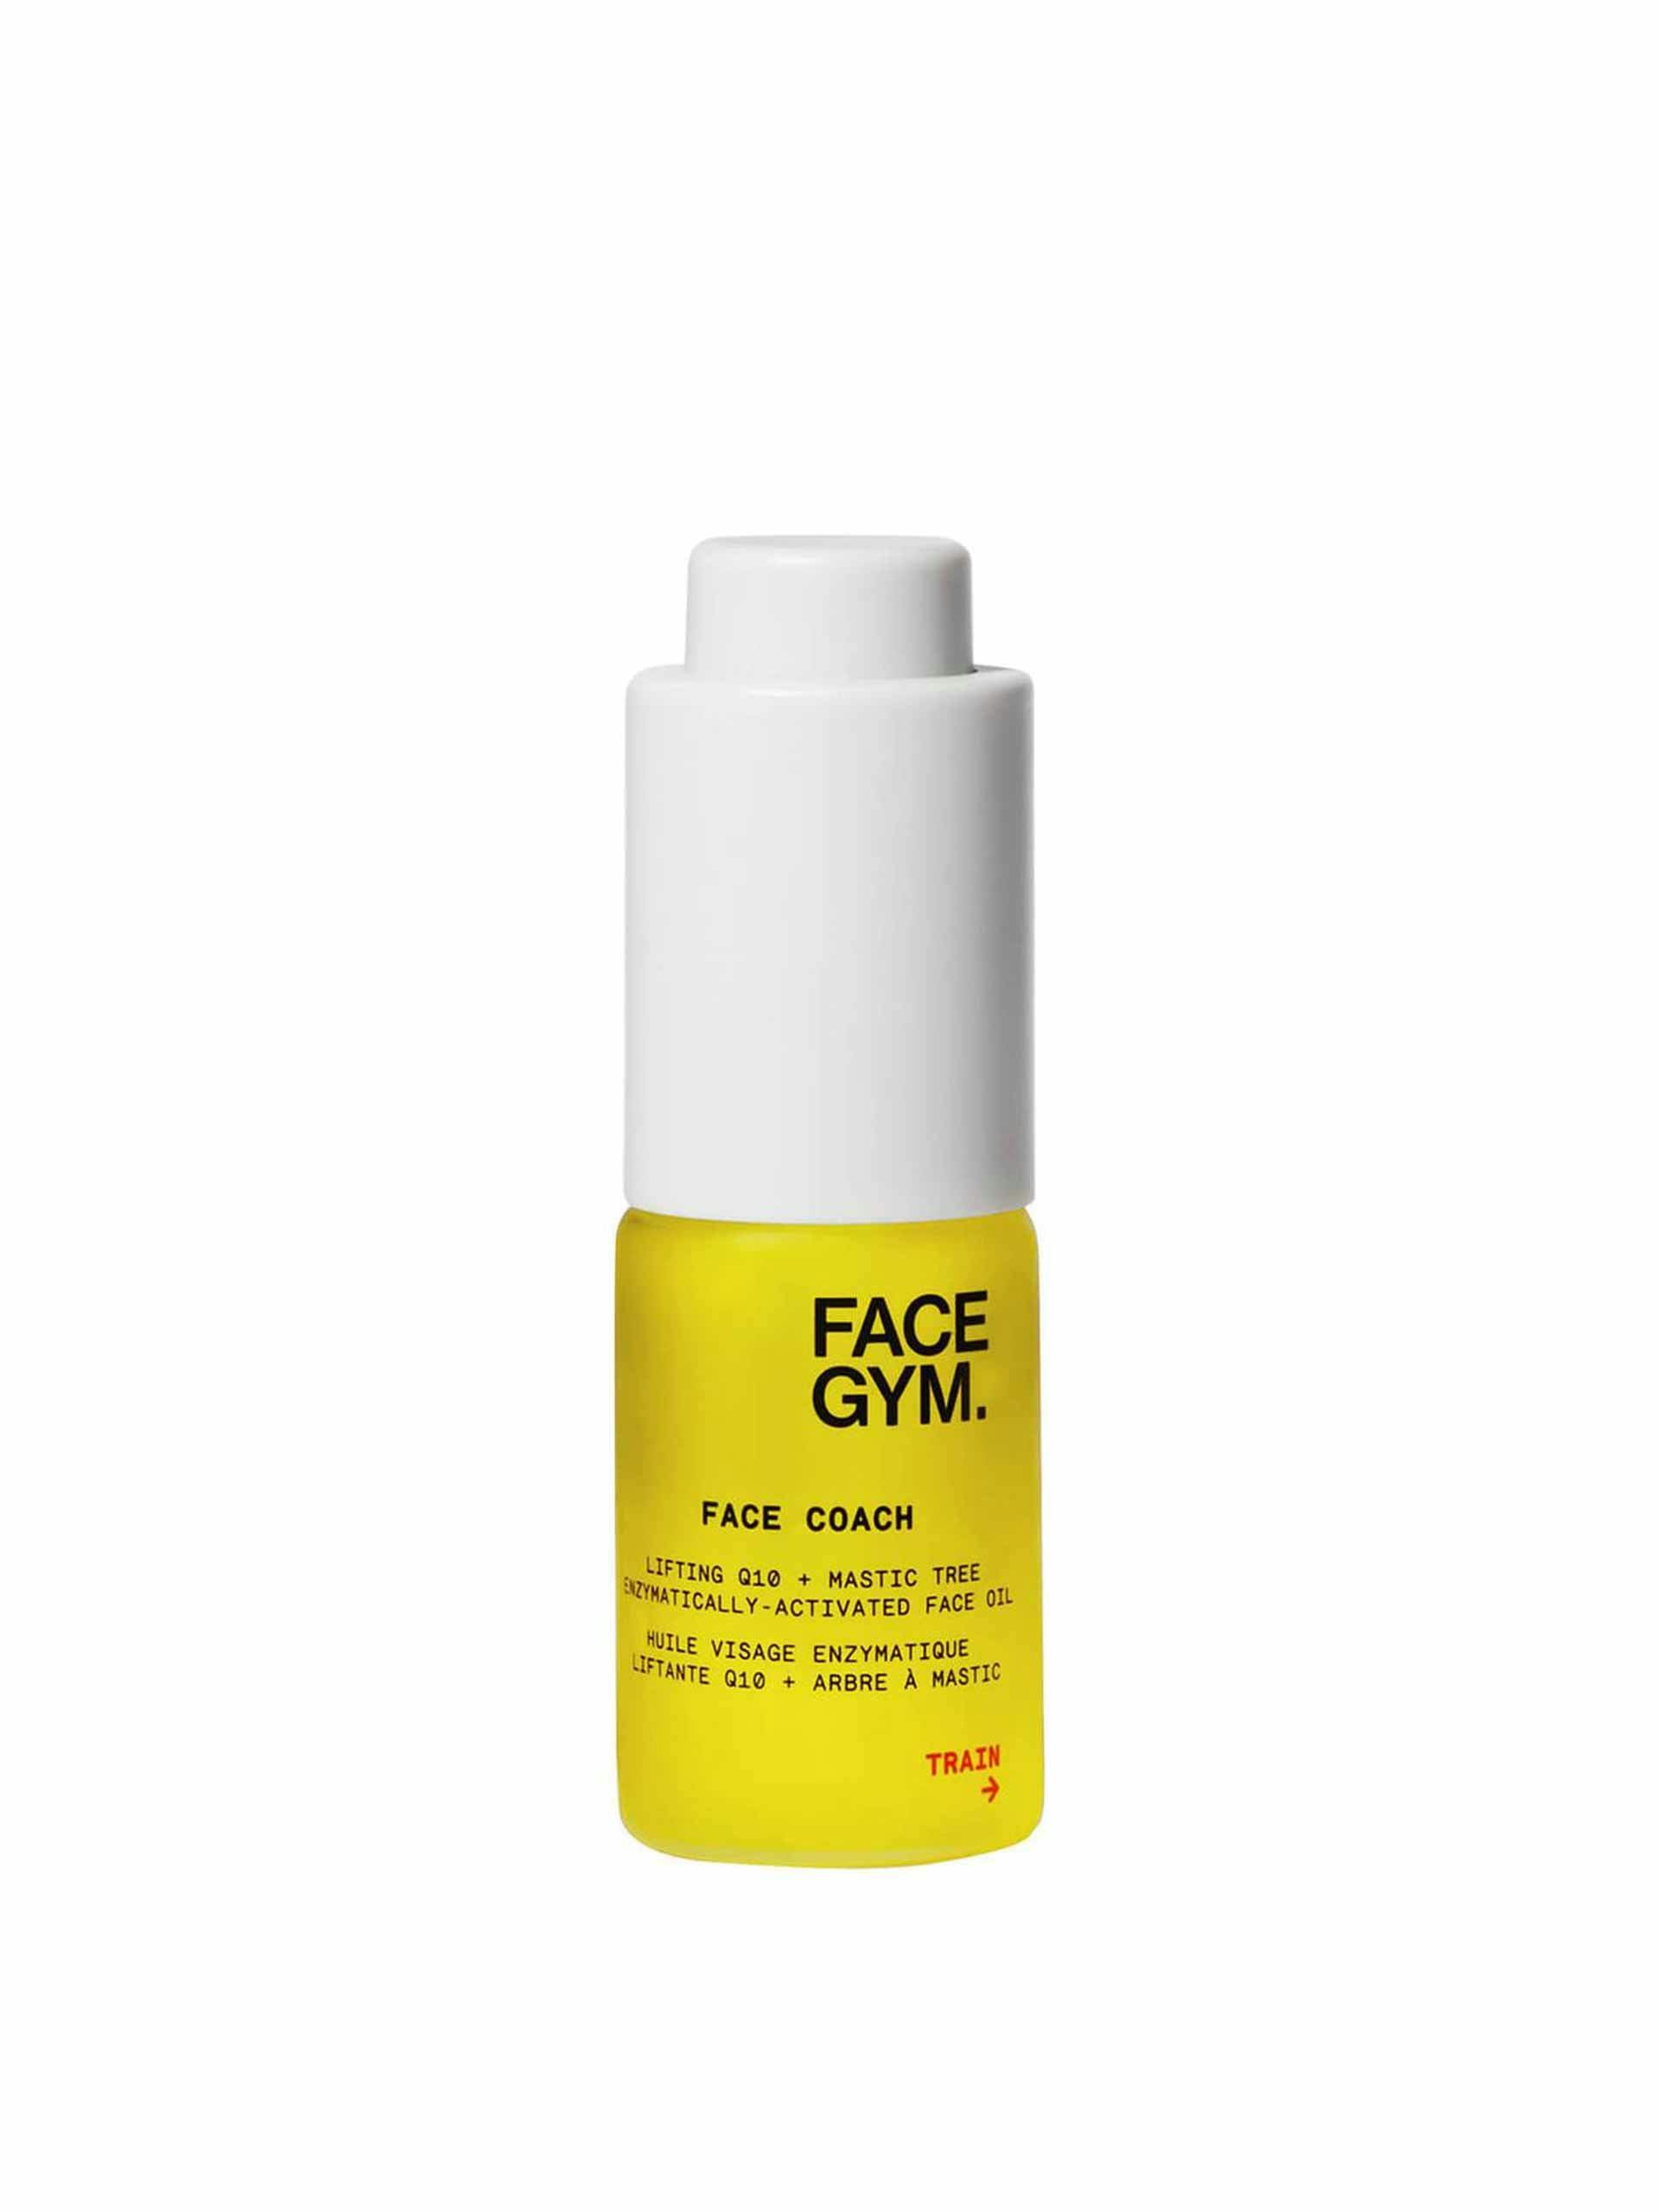 Enzyme activated face oil